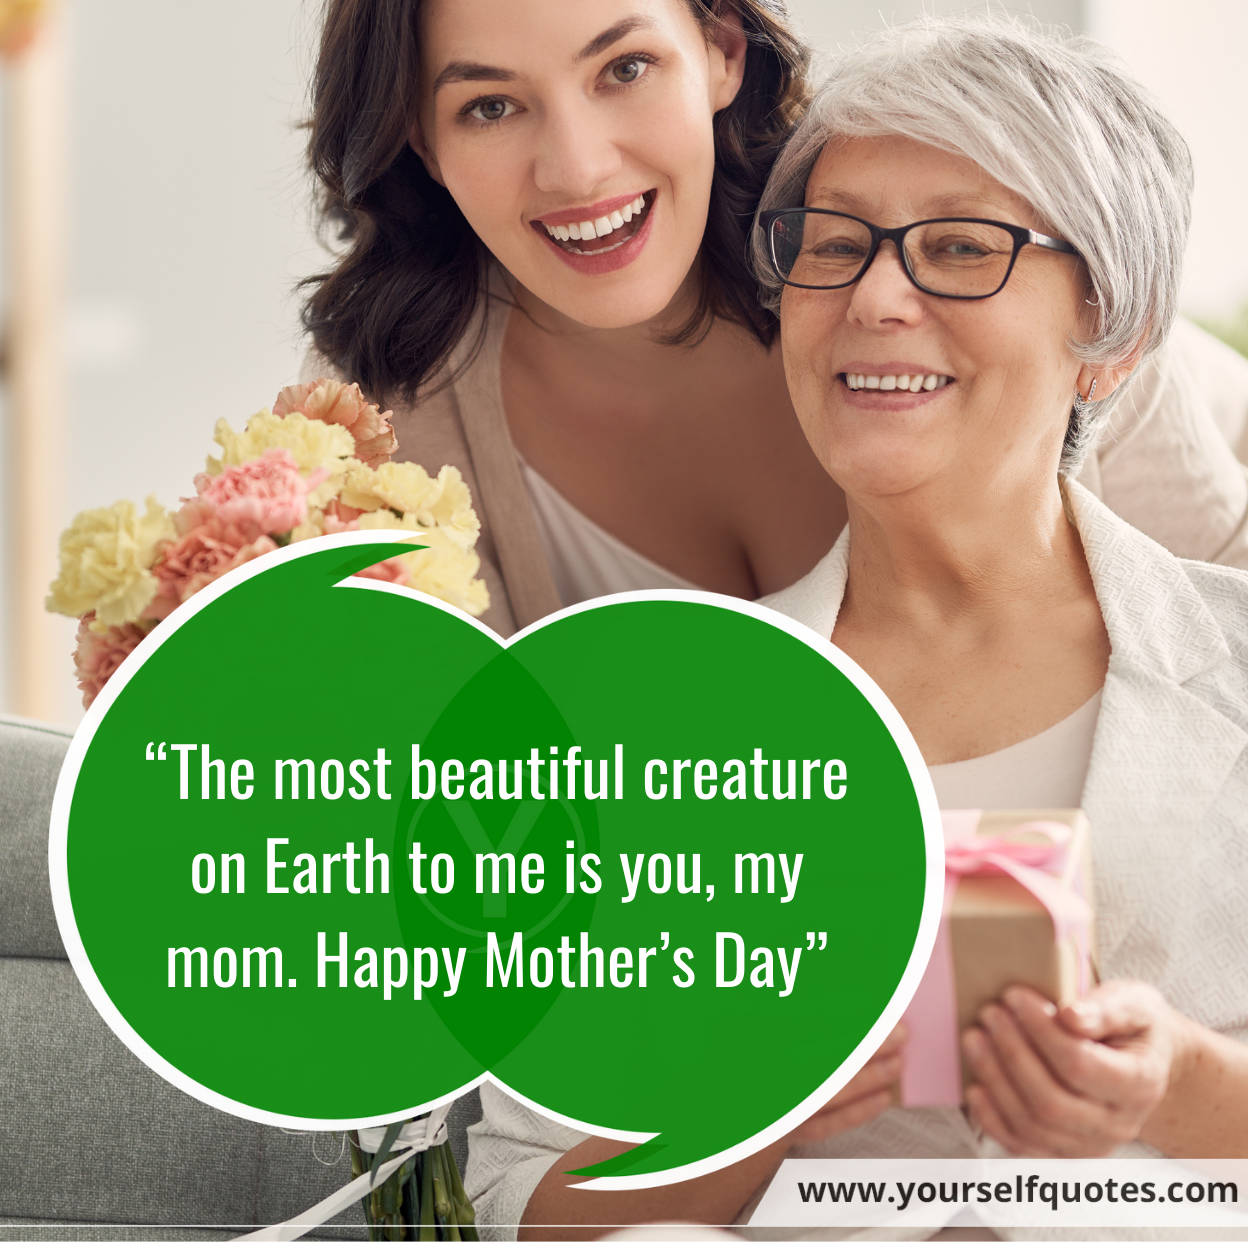 Happy Mothers Day Wishes Images